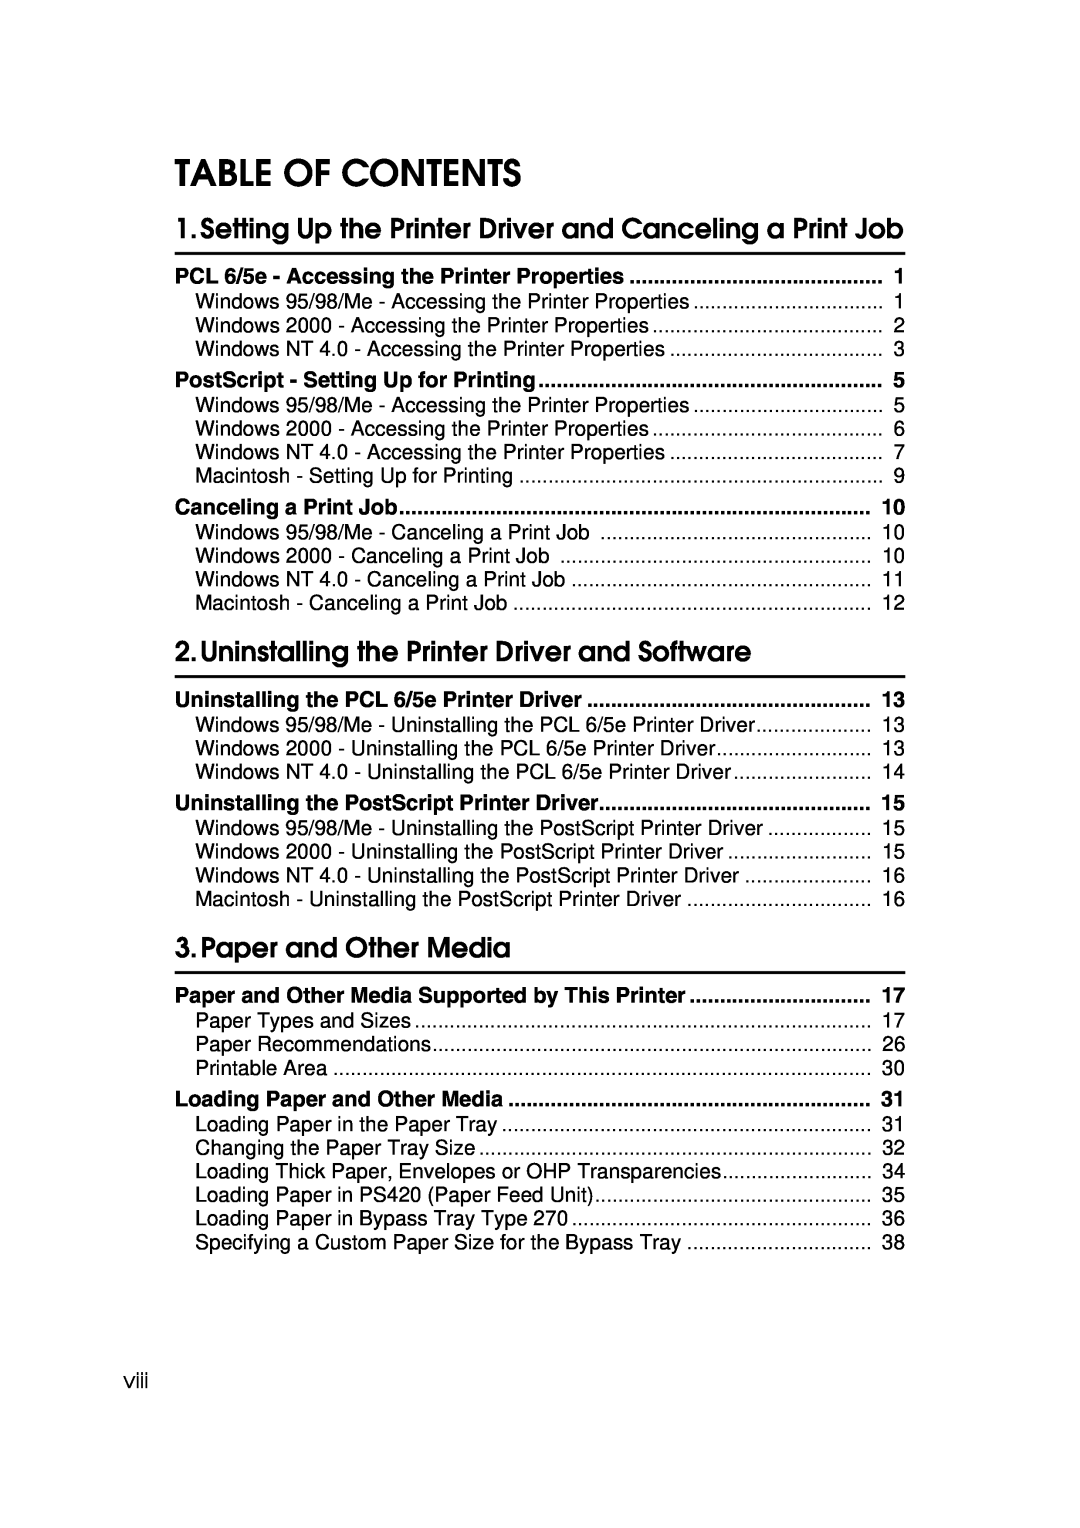 Lanier AP3200 manual Table Of Contents, Uninstalling the Printer Driver and Software, Paper and Other Media 